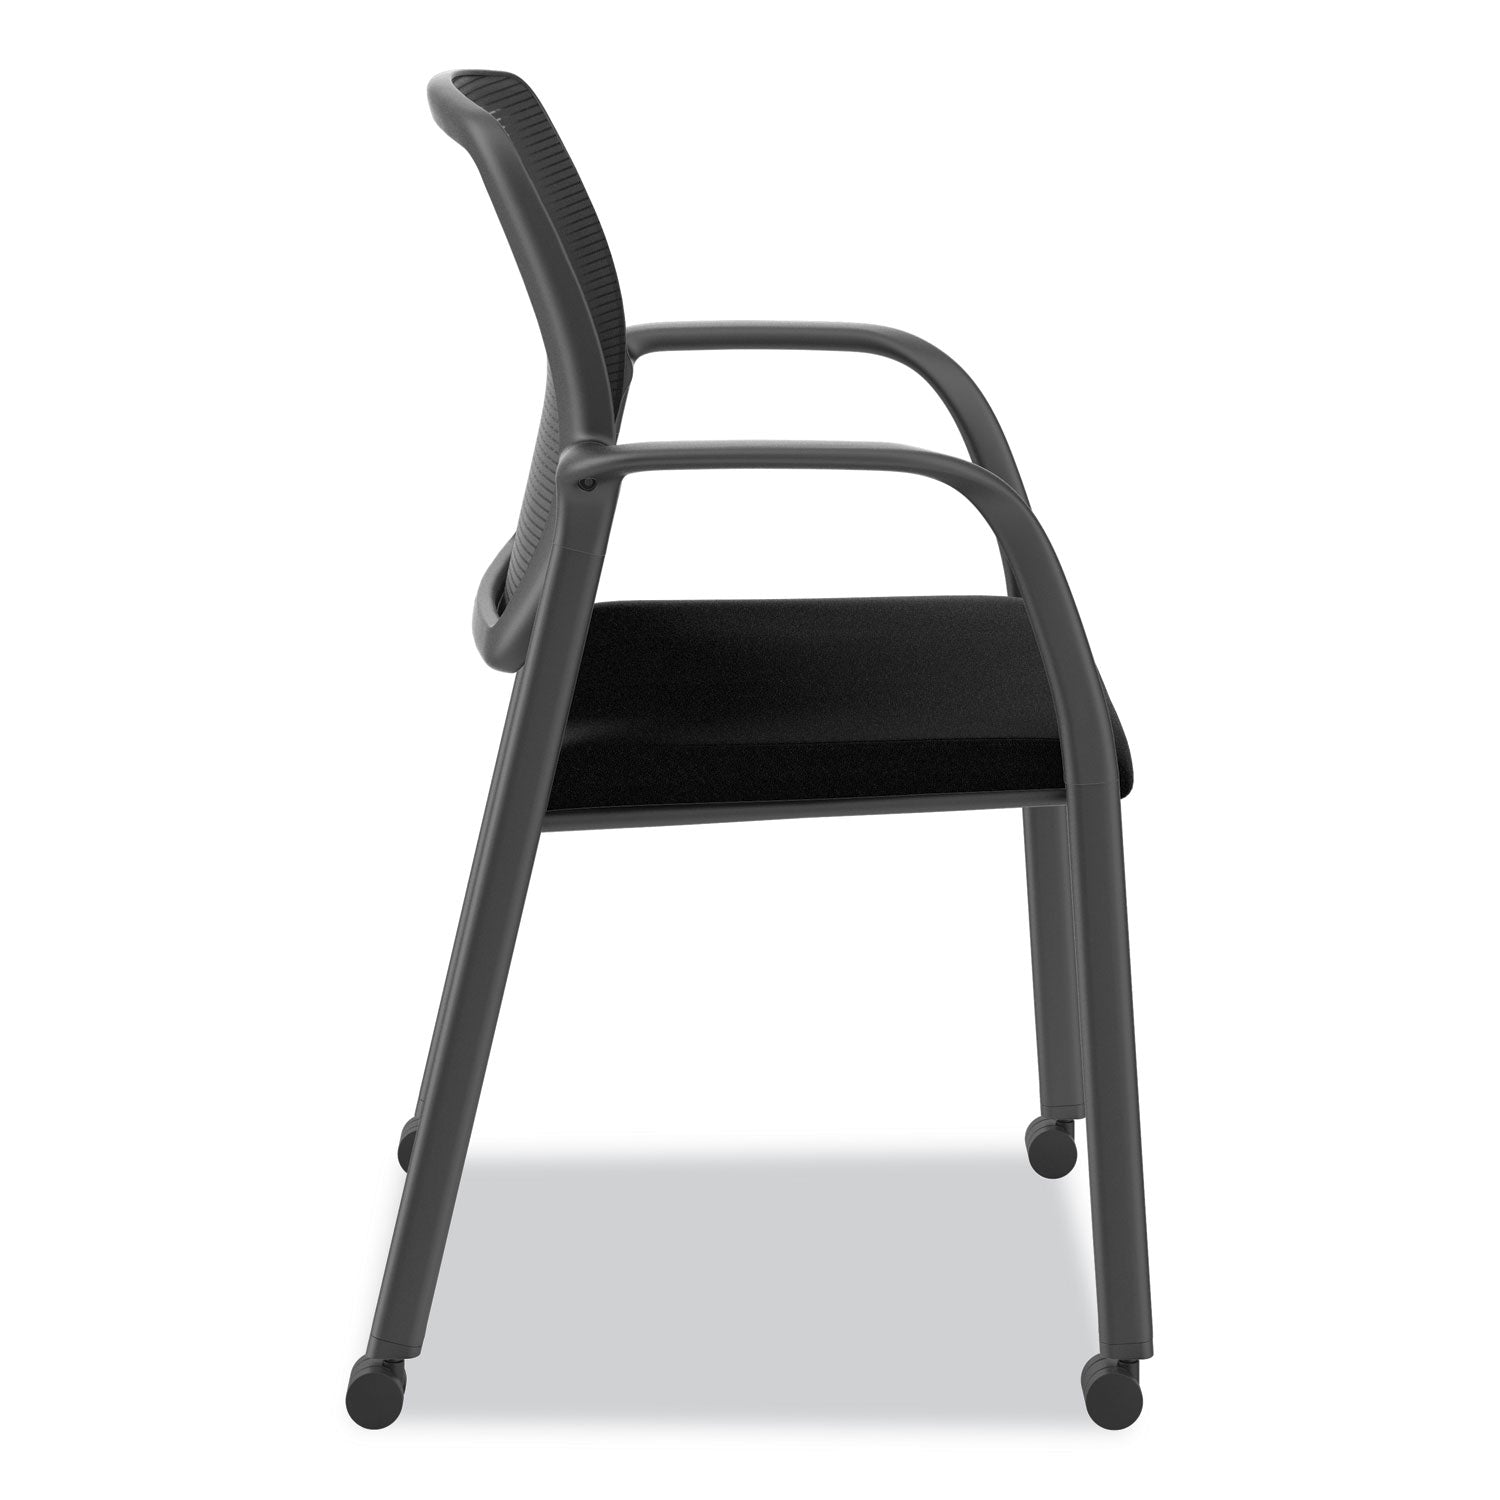 nucleus-series-recharge-guest-chair-supports-up-to-300-lb-1762-seat-height-black-seat-back-black-base_honnr6fmc10p71 - 2